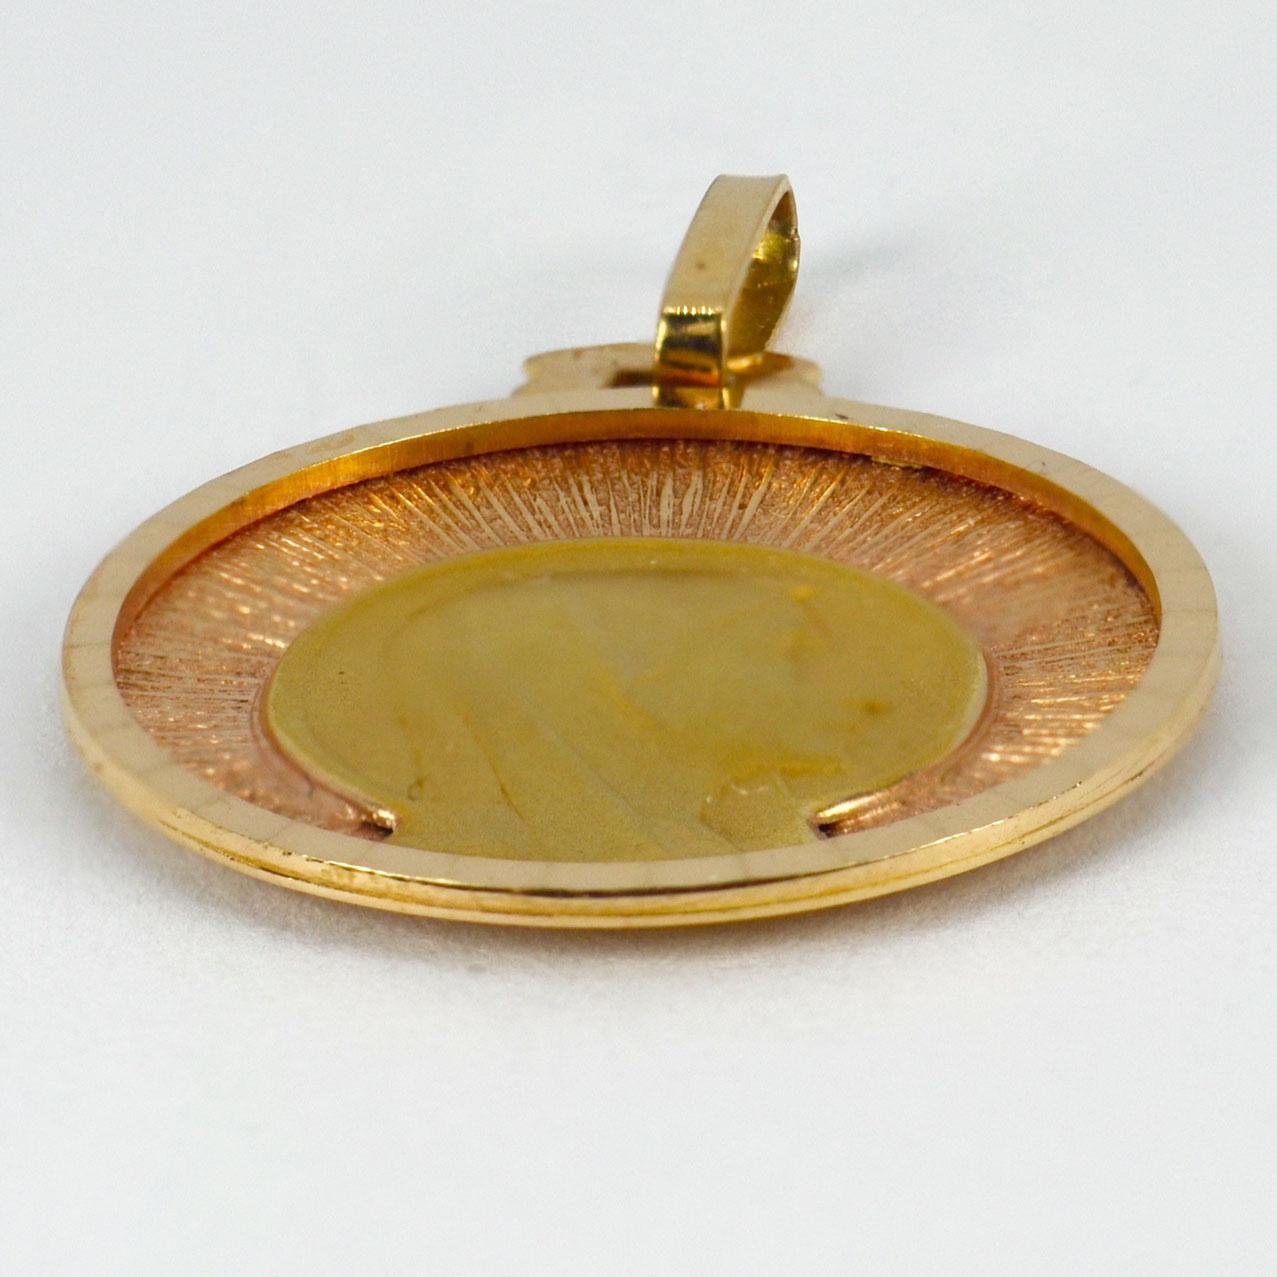 An 18 karat (18K) yellow and rose gold pendant designed as a round medal depicting the Virgin Mary against a sunburst ground. Stamped with the eagle’s head for French manufacture and 18 karat gold, with unknown maker’s mark.

Dimensions: 2.3 x 2 x